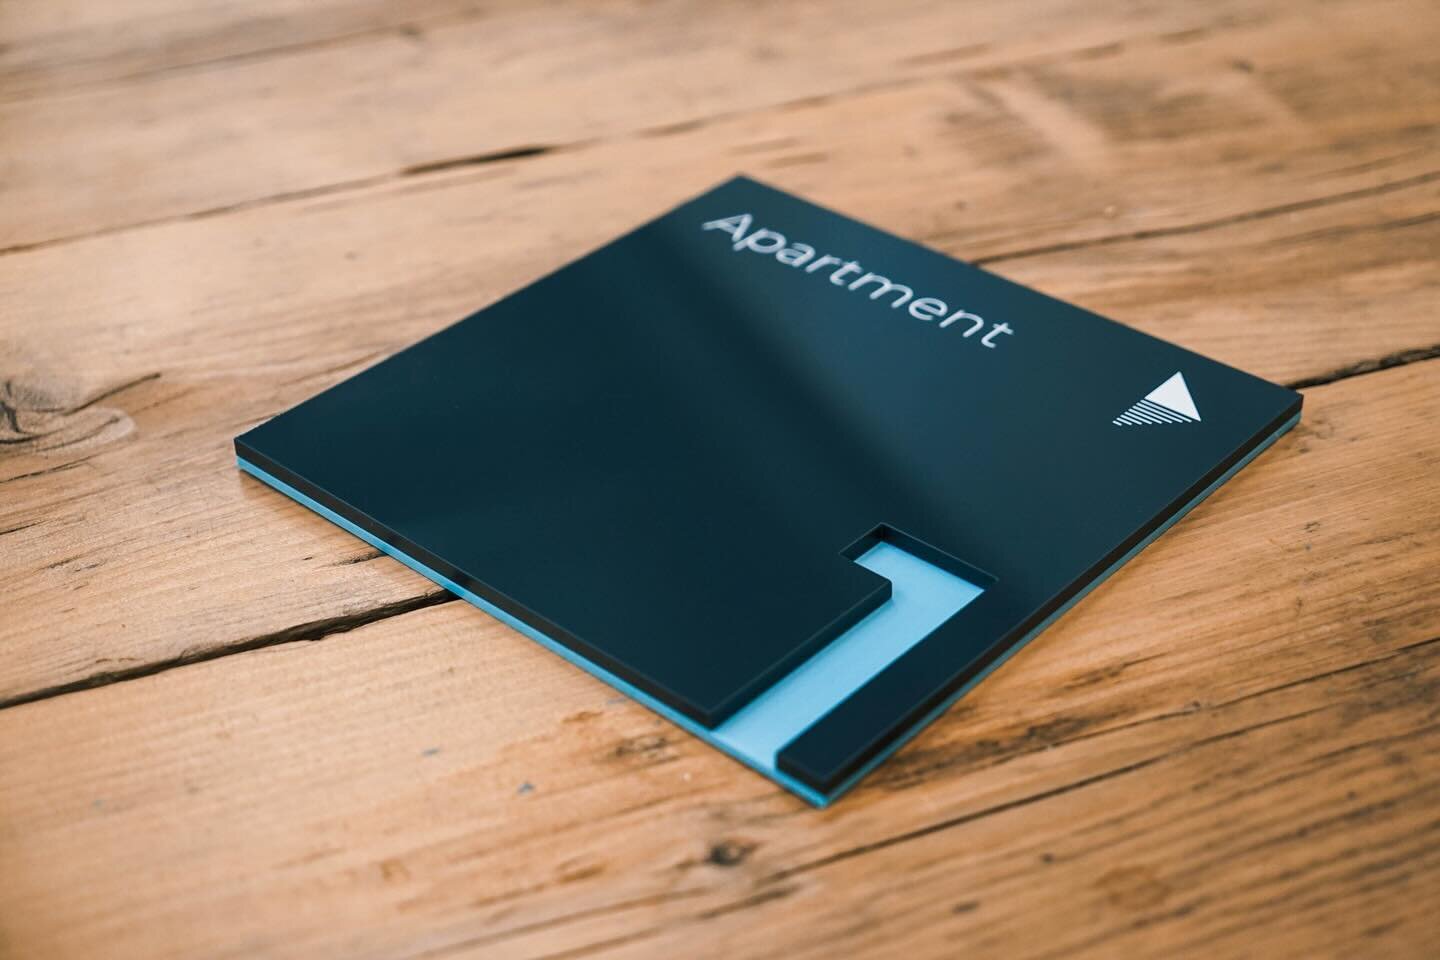 🌟 Simple Elegance: Elevate your space with our custom laser-cut directional signs on quality perspex! 🚀🔍

Enhance your surroundings effortlessly with our bespoke signs, designed to bring a touch of refined simplicity.

💡 Why Choose Us?
Discover t